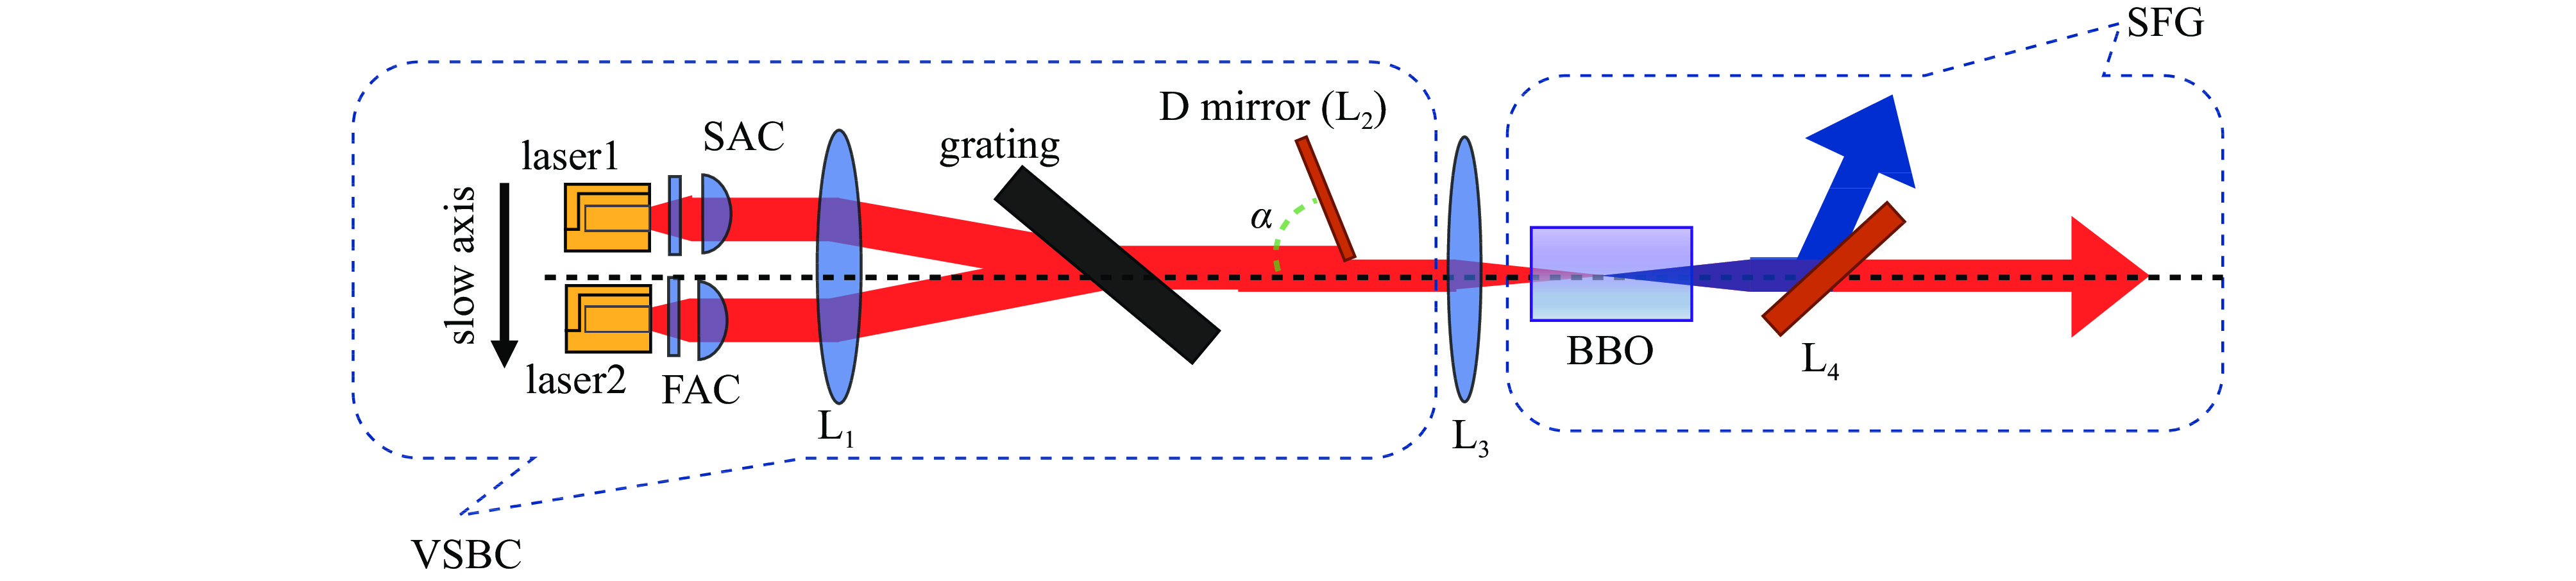 Experimental setup diagram of sum frequency generation of semiconductor laser based on V-shaped spectral beam combining